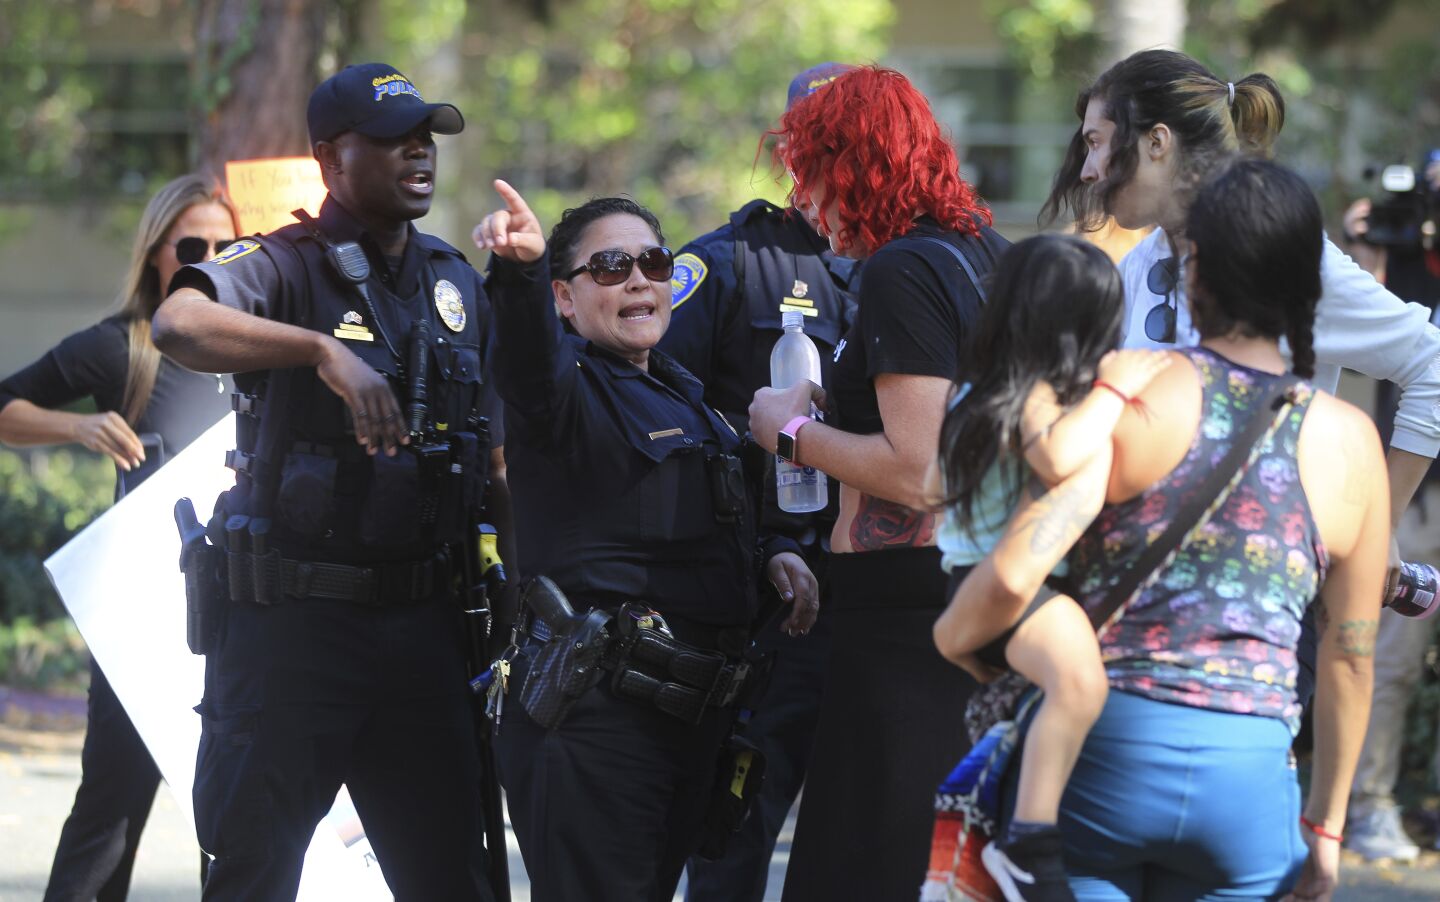 Chula Vista police prevent supporters of the Drag Queen Story Hour from entering the area where protesters against the story hour are at the Chula Vista Public Library, Civic Center Branch, on Tuesday, September 10, 2019 in Chula Vista, California.